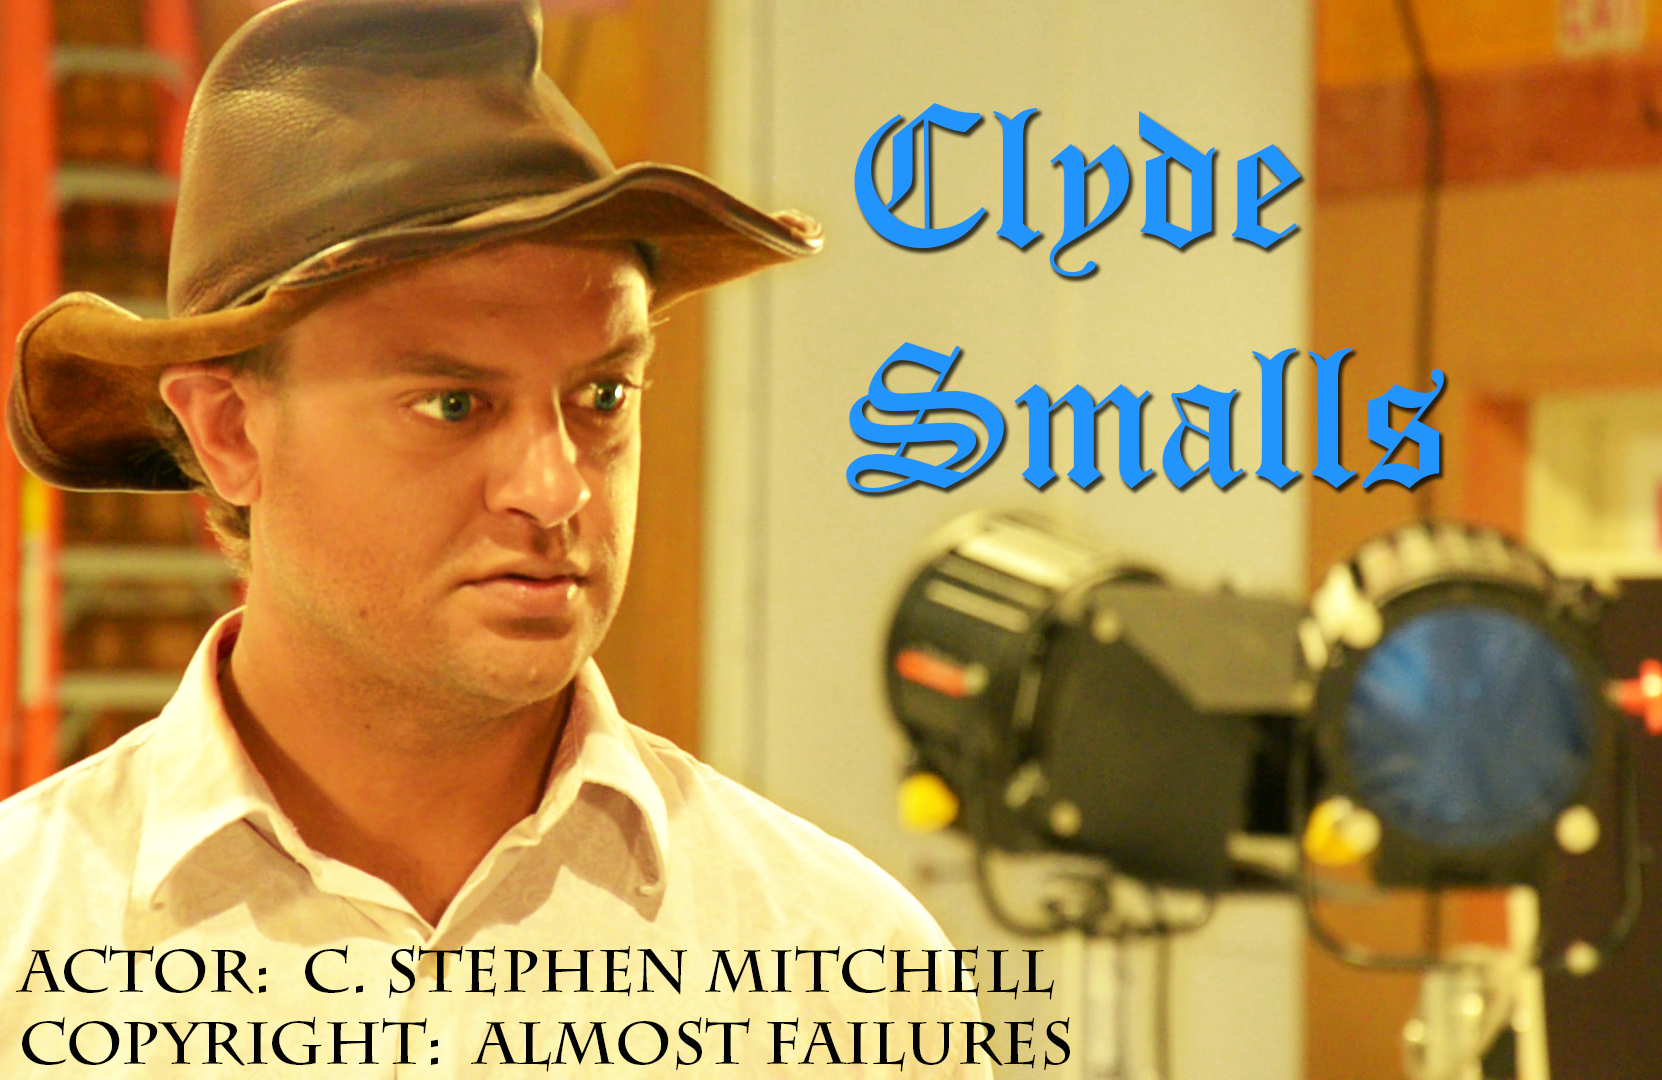 C. Stephen Mitchell playing Clyde Smalls in 